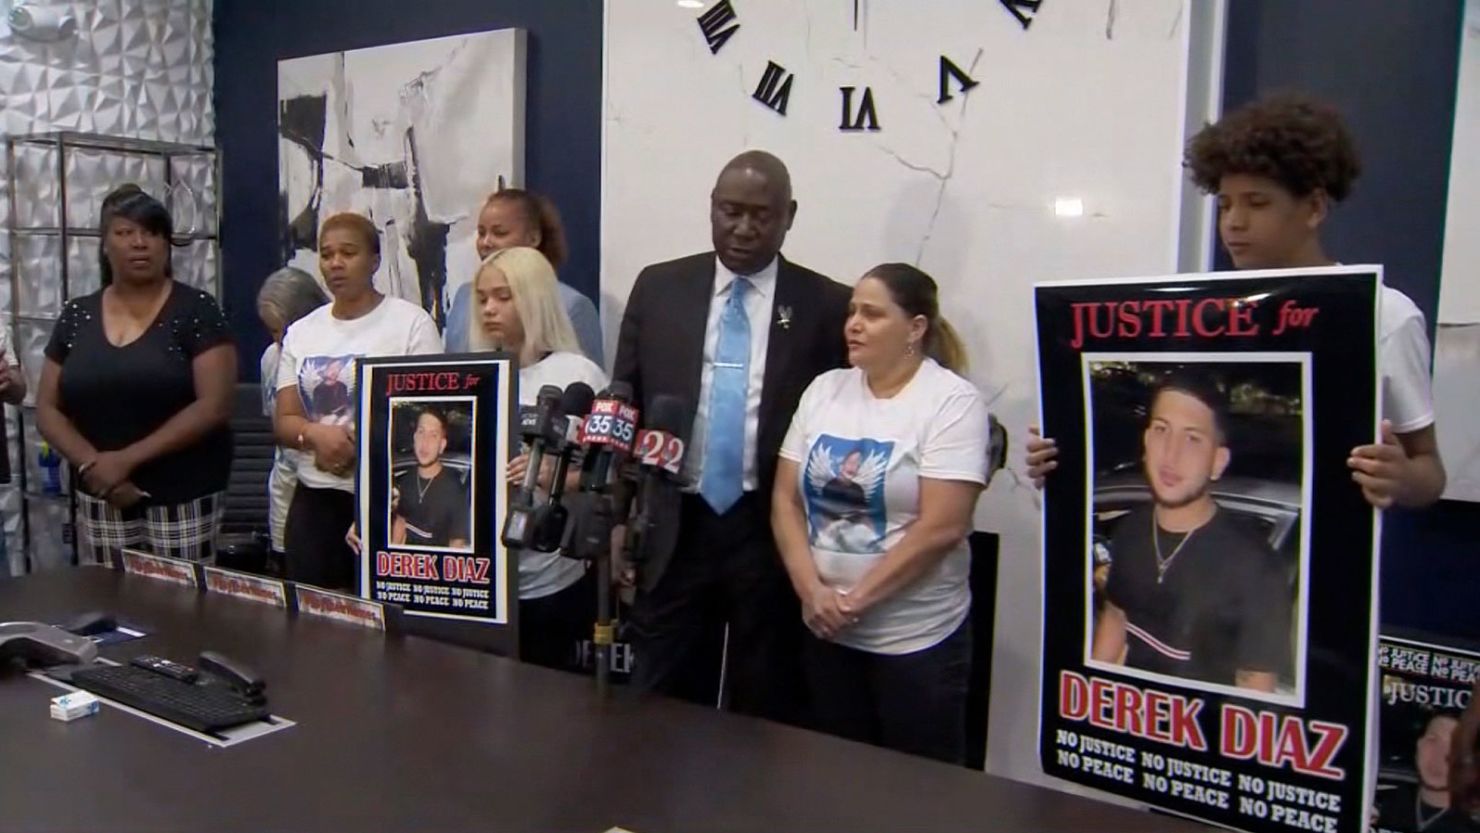 Attorney Ben Crump holds a press conference on July 8 with the family of Derek Diaz, who law enforcement says was shot by Orlando police. 